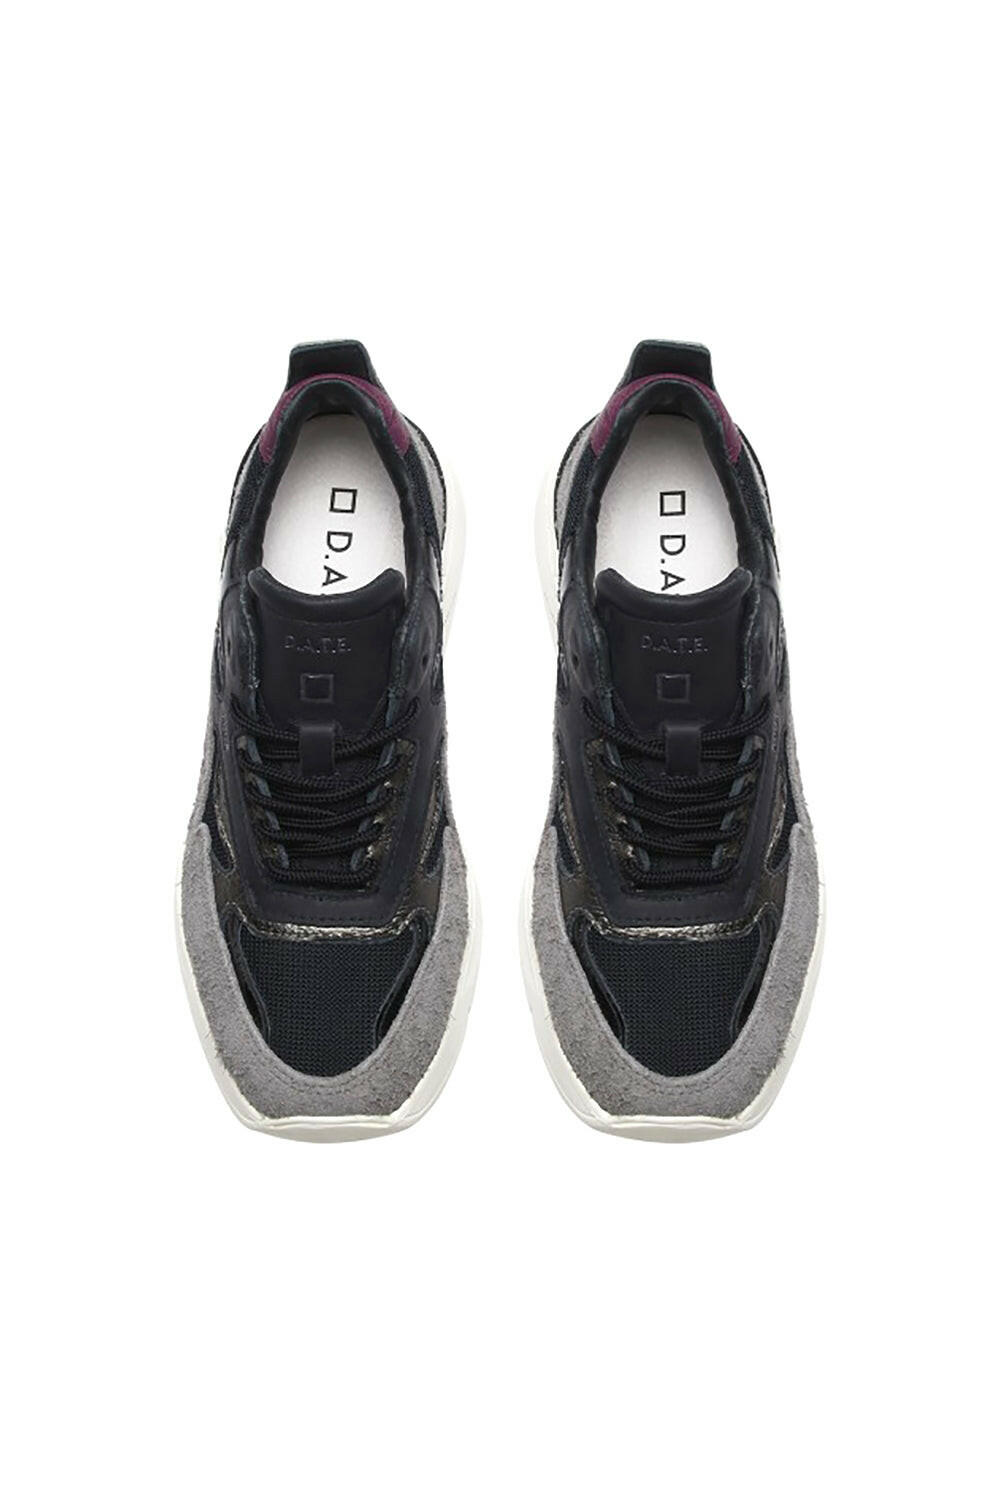  Date Sneakers Fuga Black Donna - 3